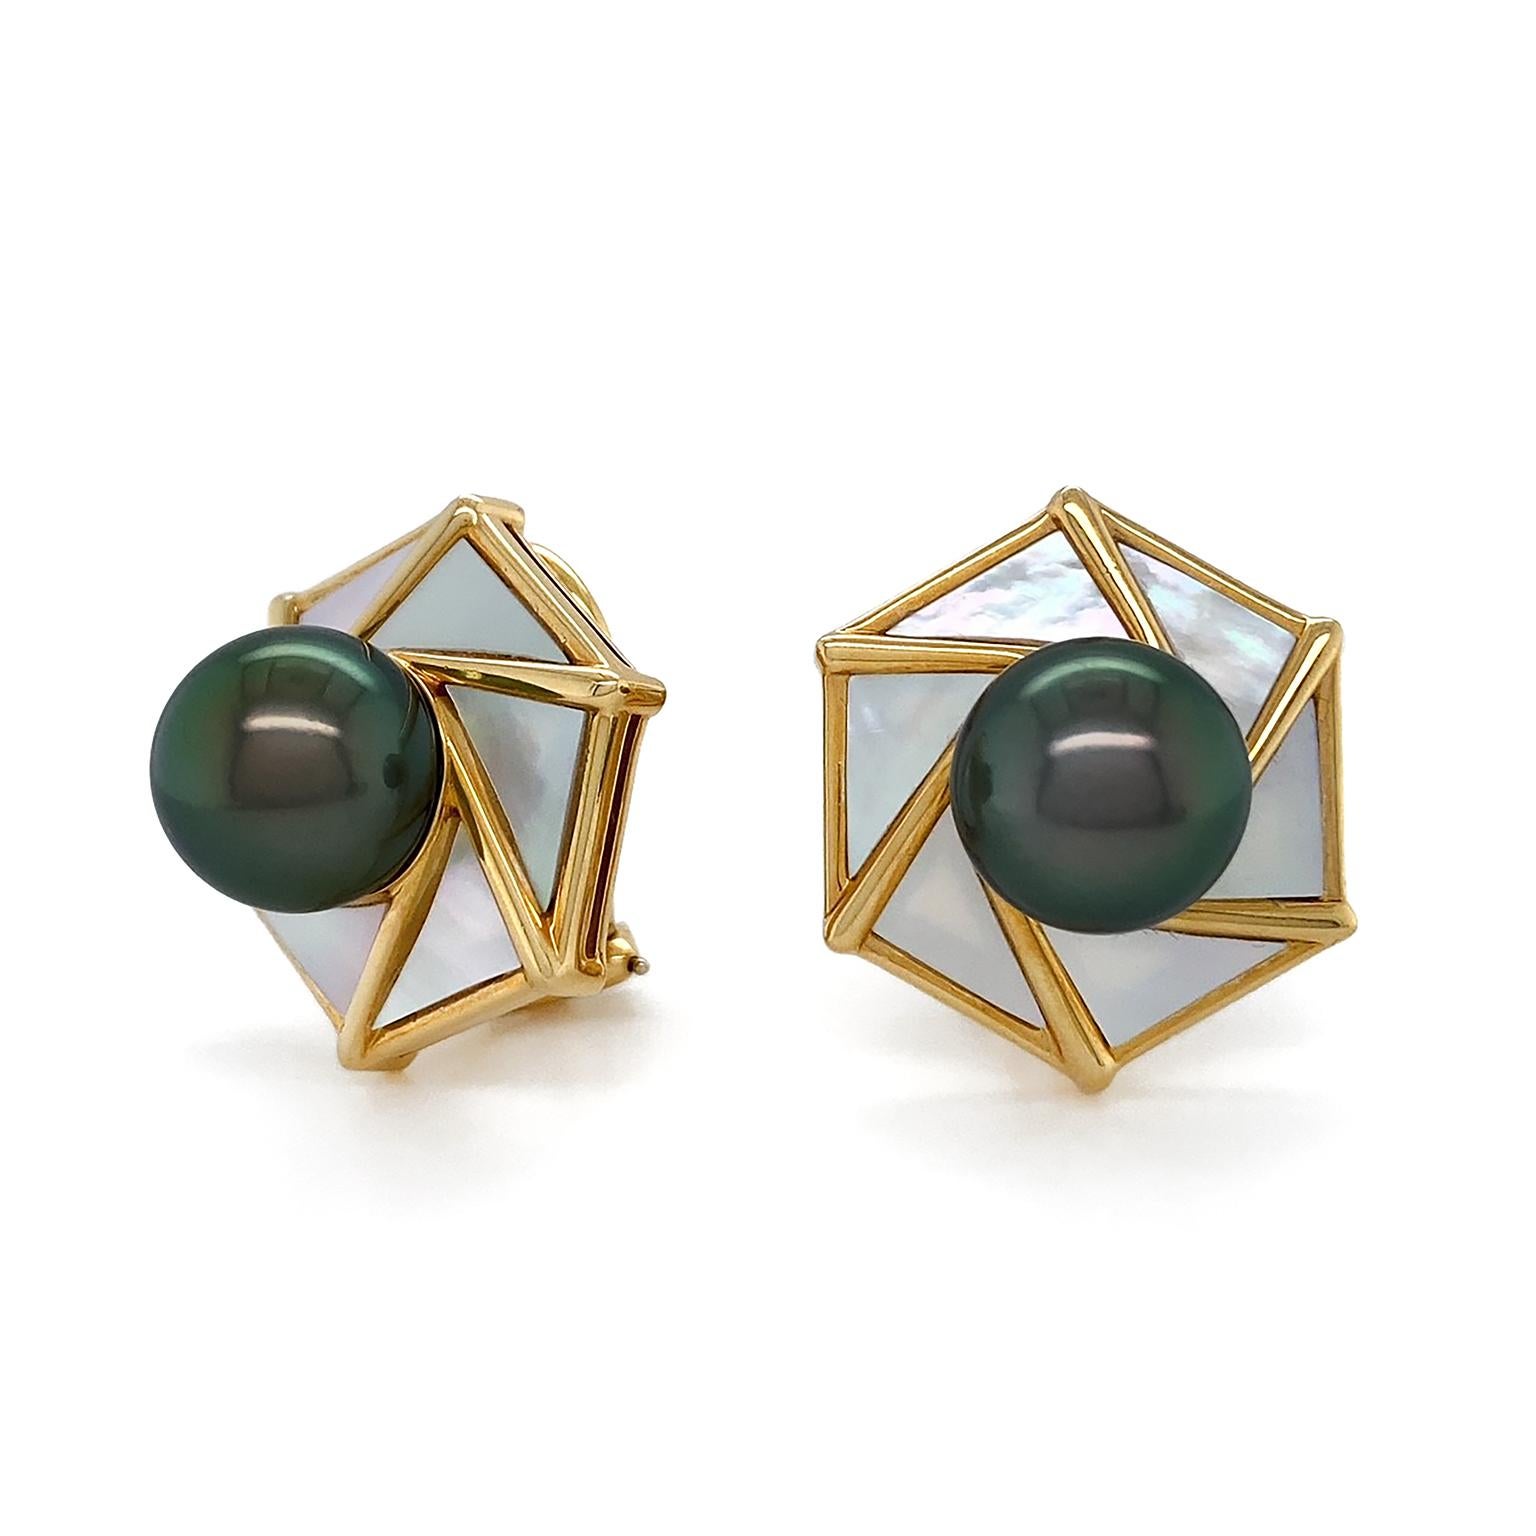 White Mother of Pearl borders a Tahitian pearl while complemented by 18k yellow gold. For these iridescent earrings, specially cut White Mother of Pearl forms six pieces measuring 8.5 by 6mm, with a total weight of 12 carats. 18k yellow gold metal